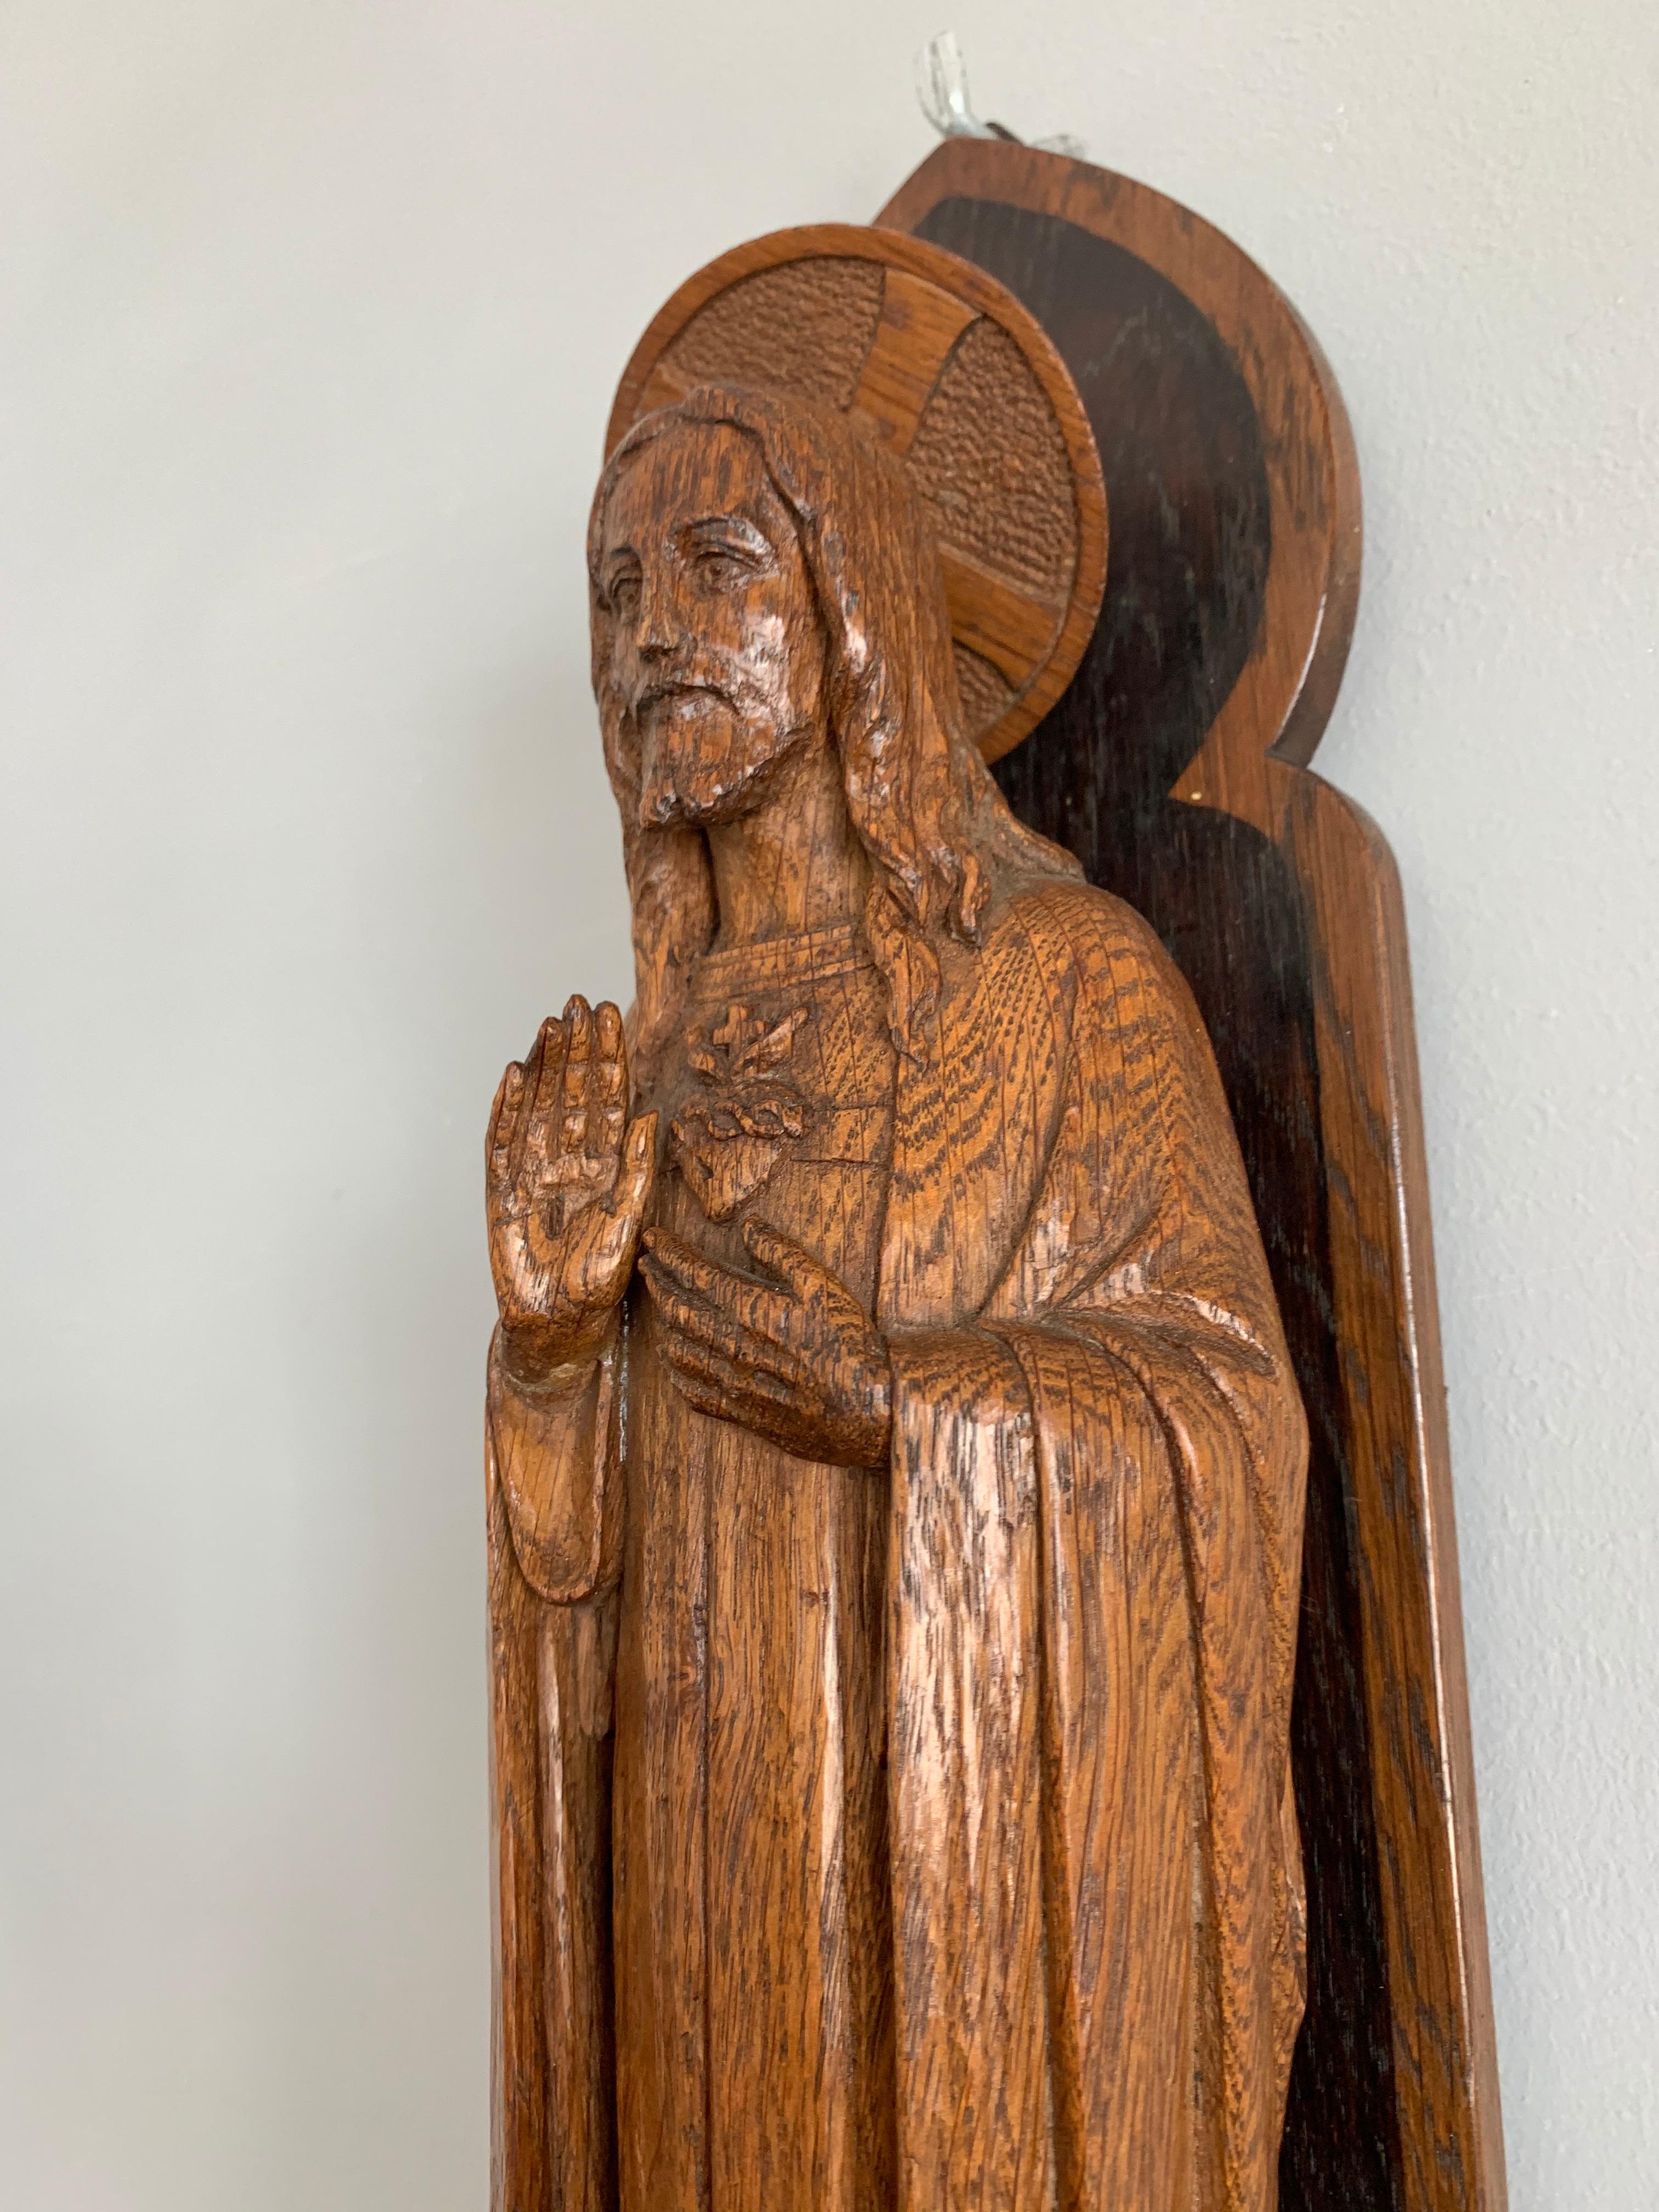 Quality carved Christ sculpture on original, Gothic Revival Console with illuminating cross lightbulb!

This carved oak, sacred heart statue is one of the most beautiful examples we have ever had the pleasure of offering. The beauty is not only in